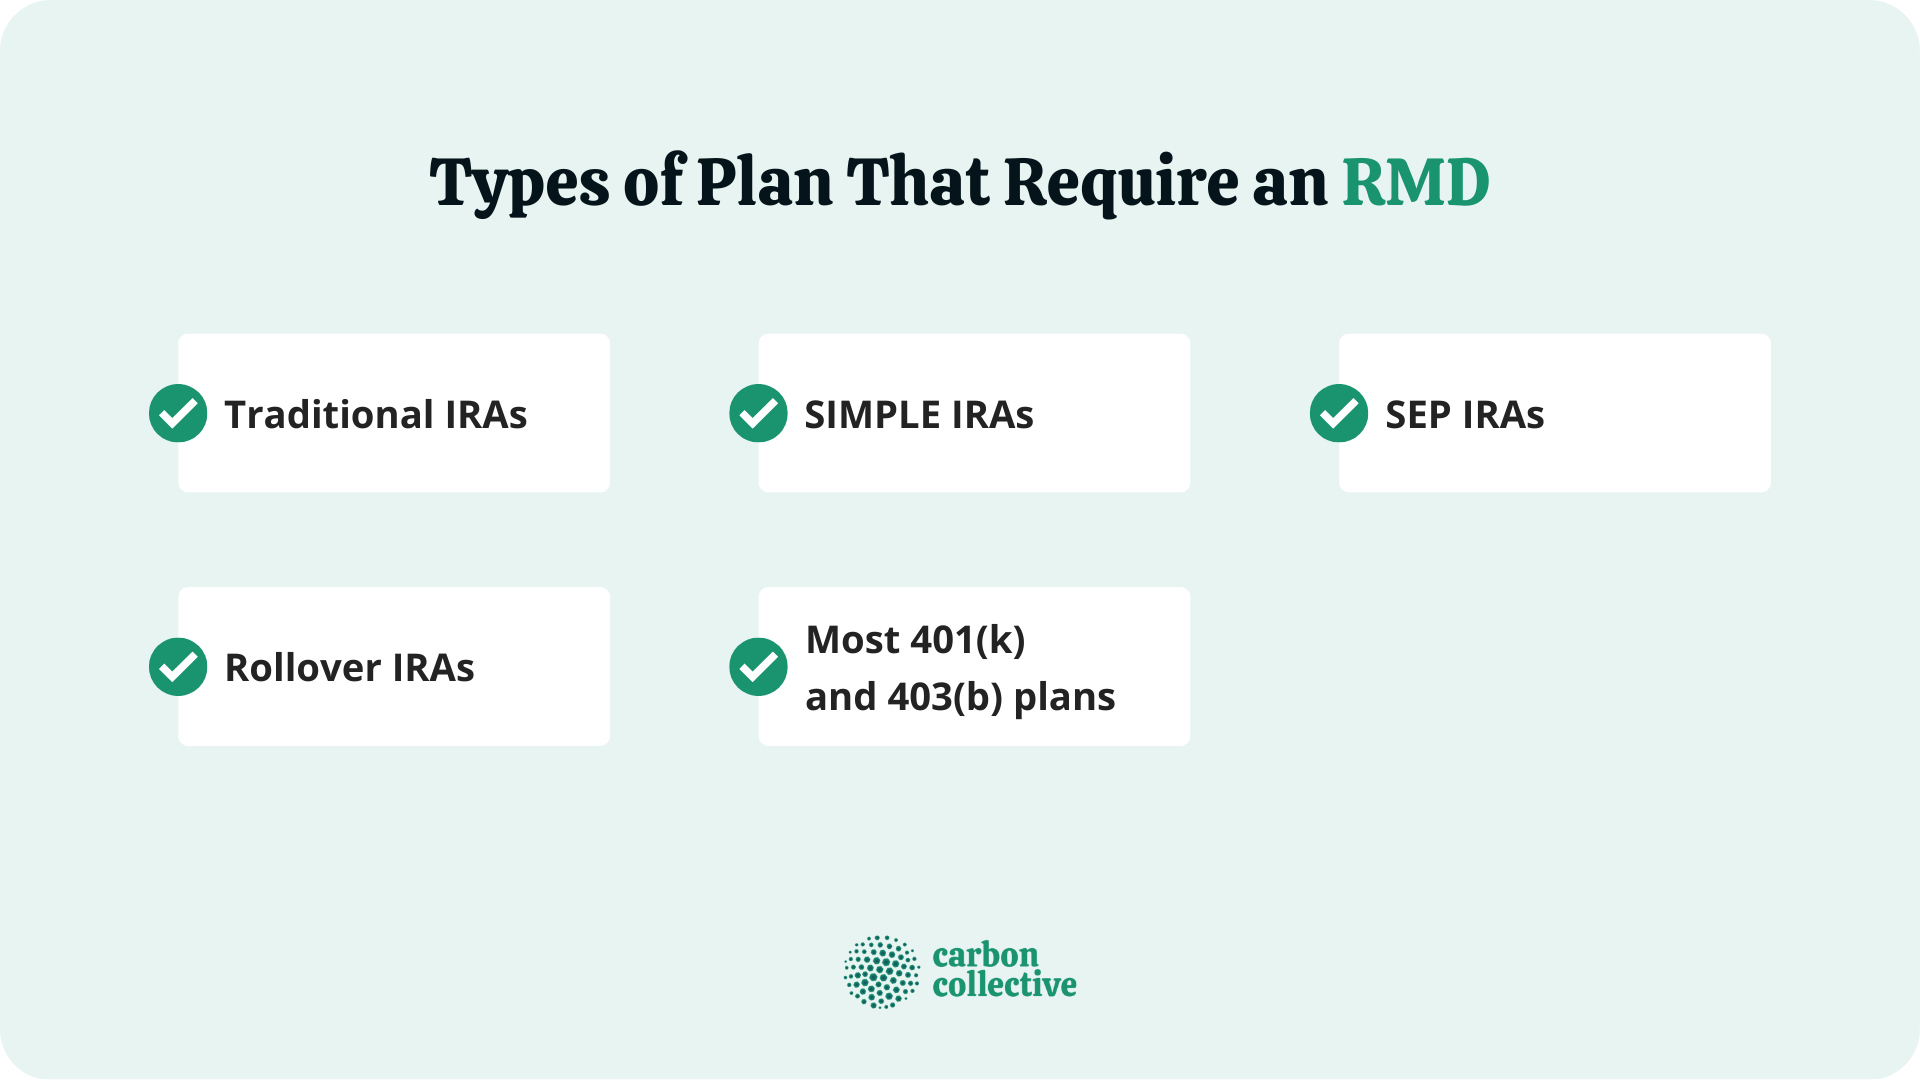 How to Calculate Required Minimum Distribution (RMD)